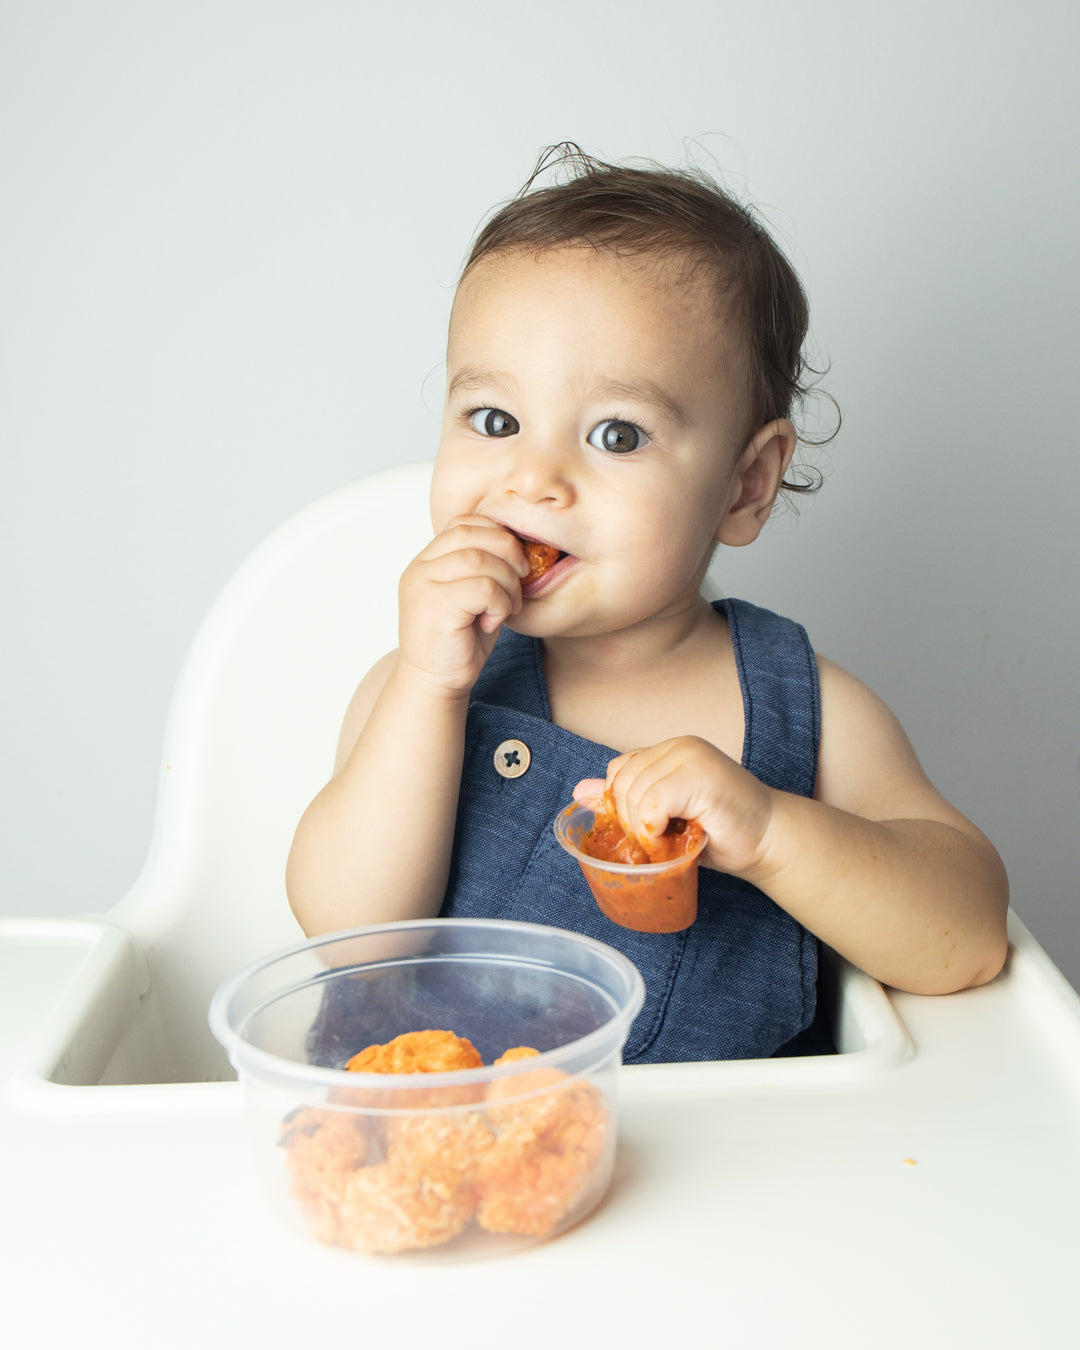 Introducing Finger Foods to Your Baby